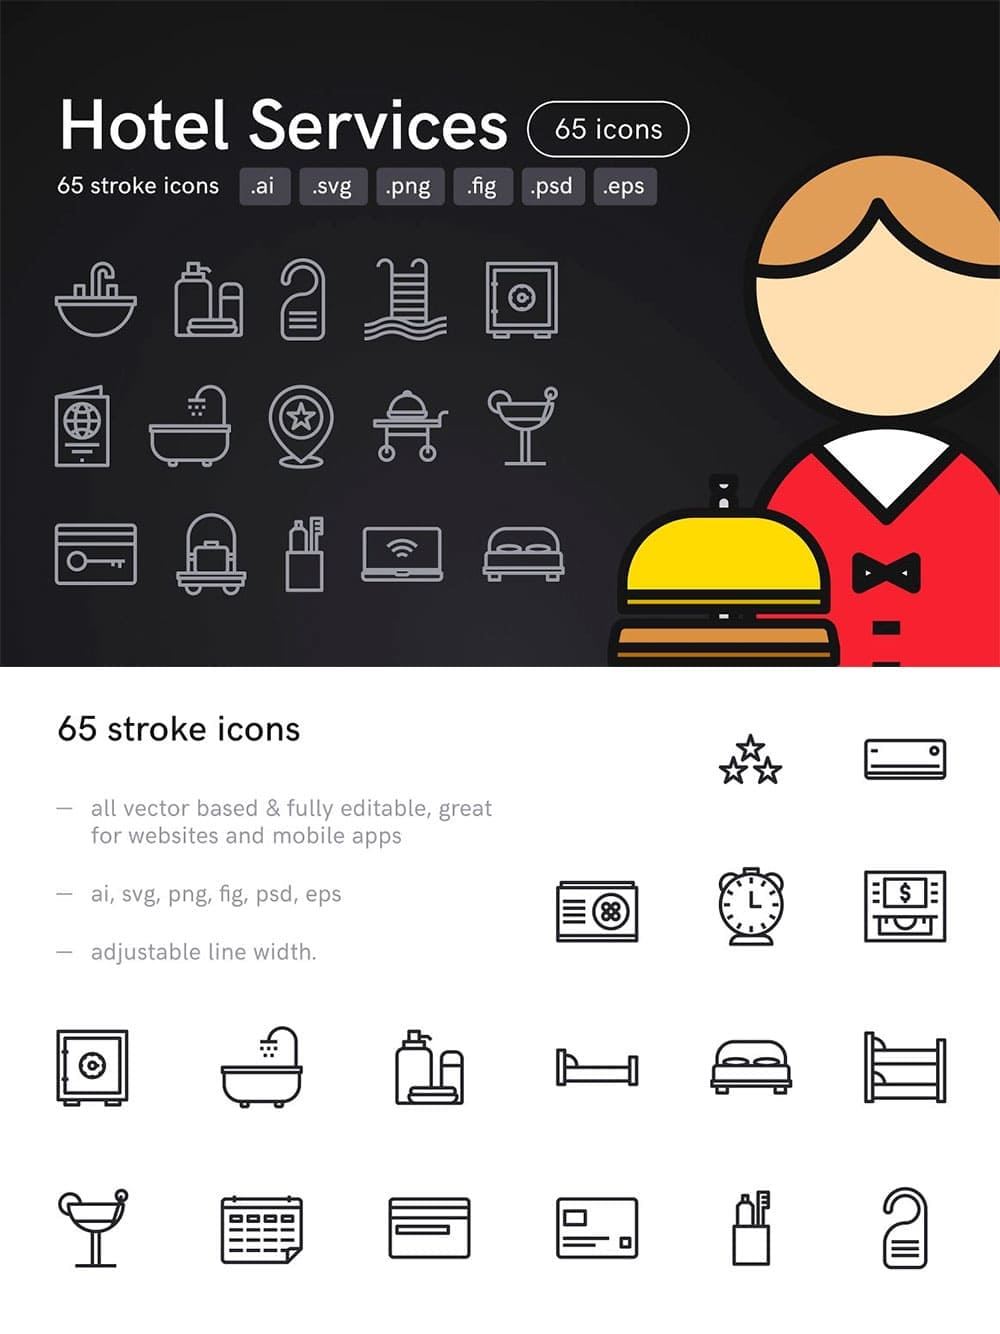 Hotel services icons, picture for pinterest.